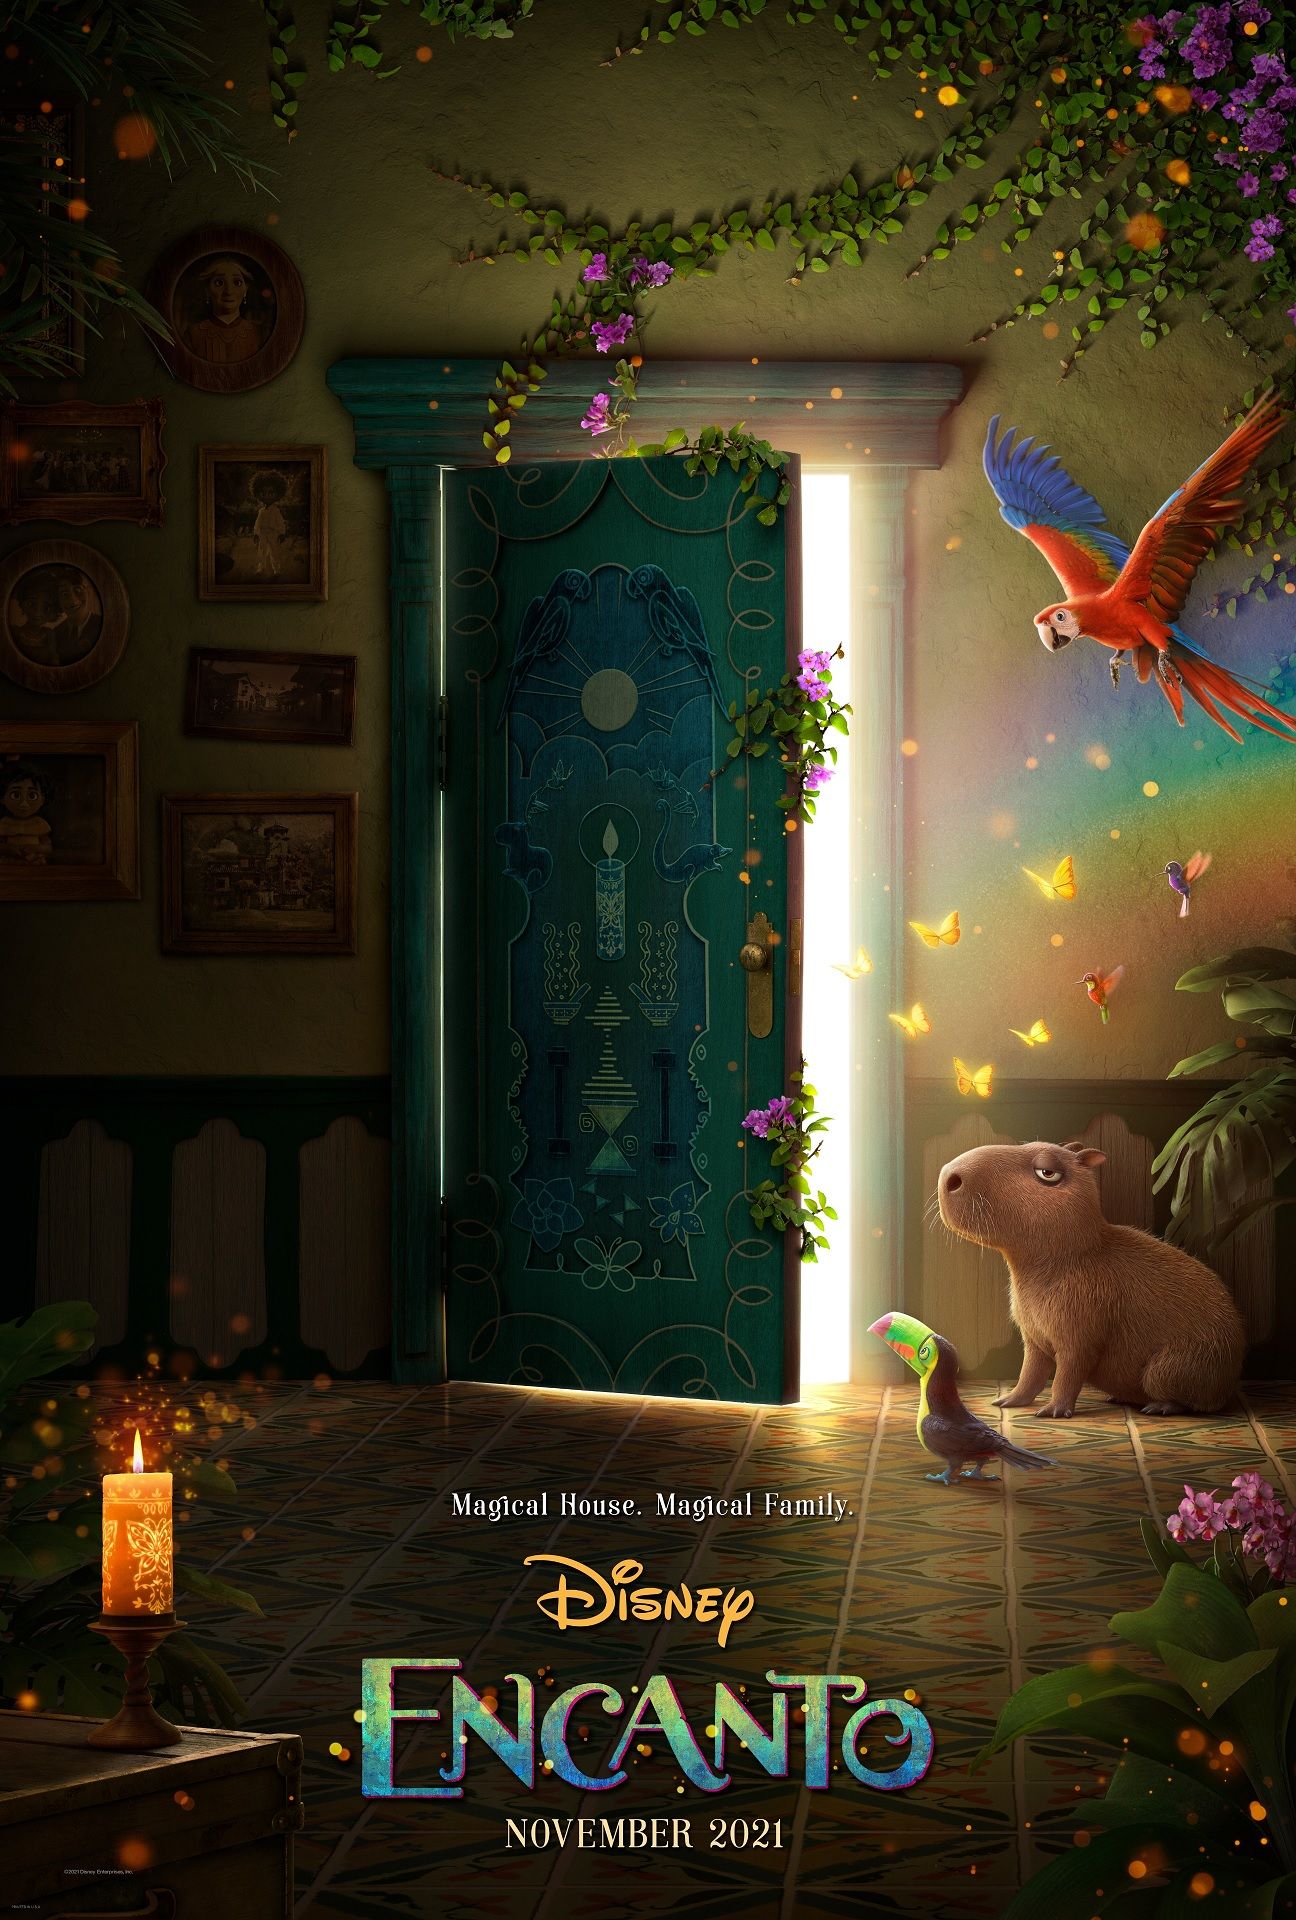 Encanto 2021 Disney Musical Film Image, Posters, Arts, Merch, and Other Content Cartoon Image